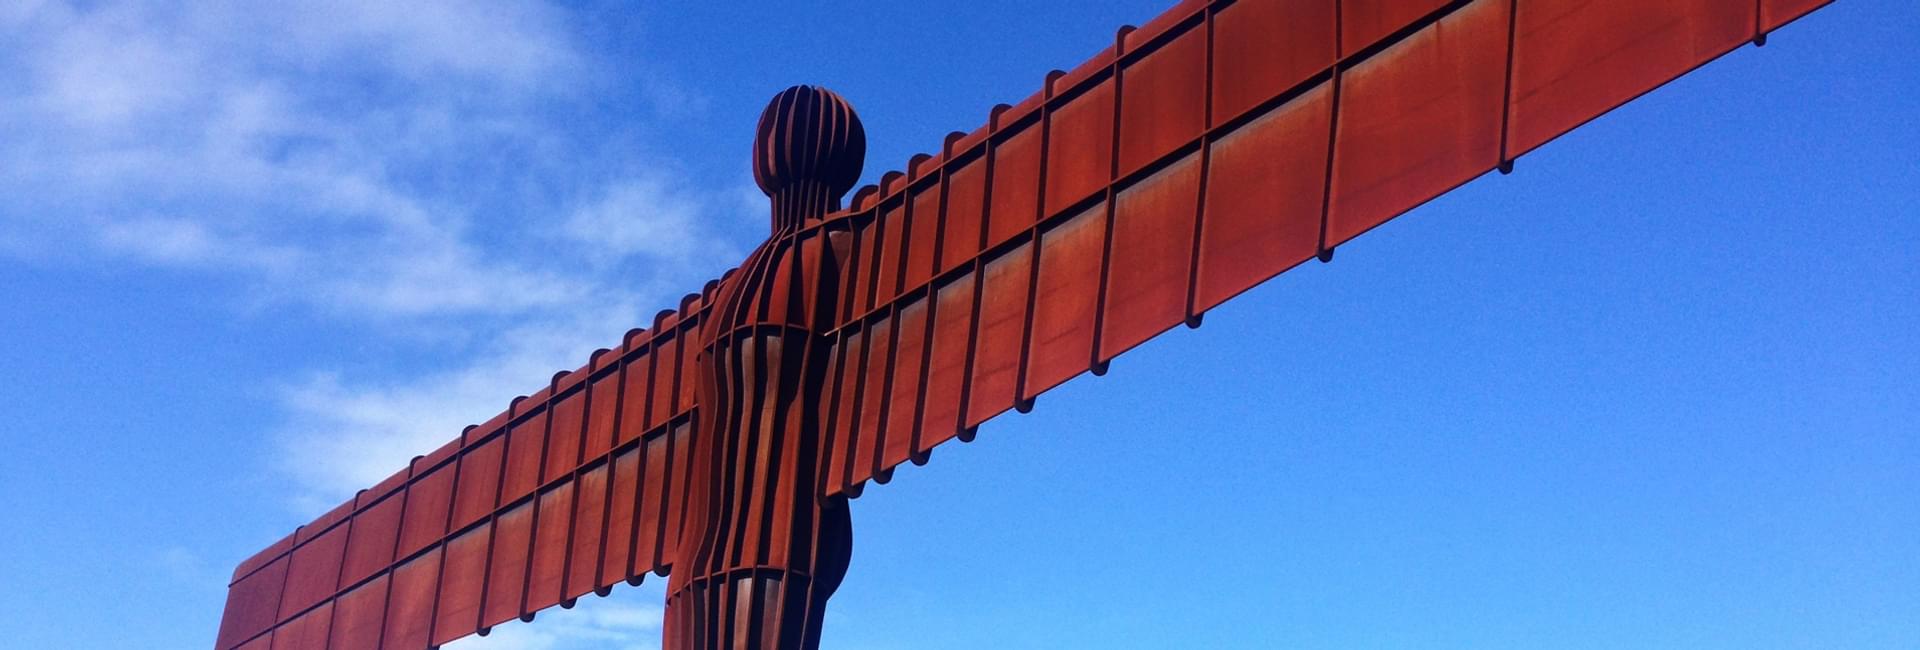 First Timer Angel of the North HERO